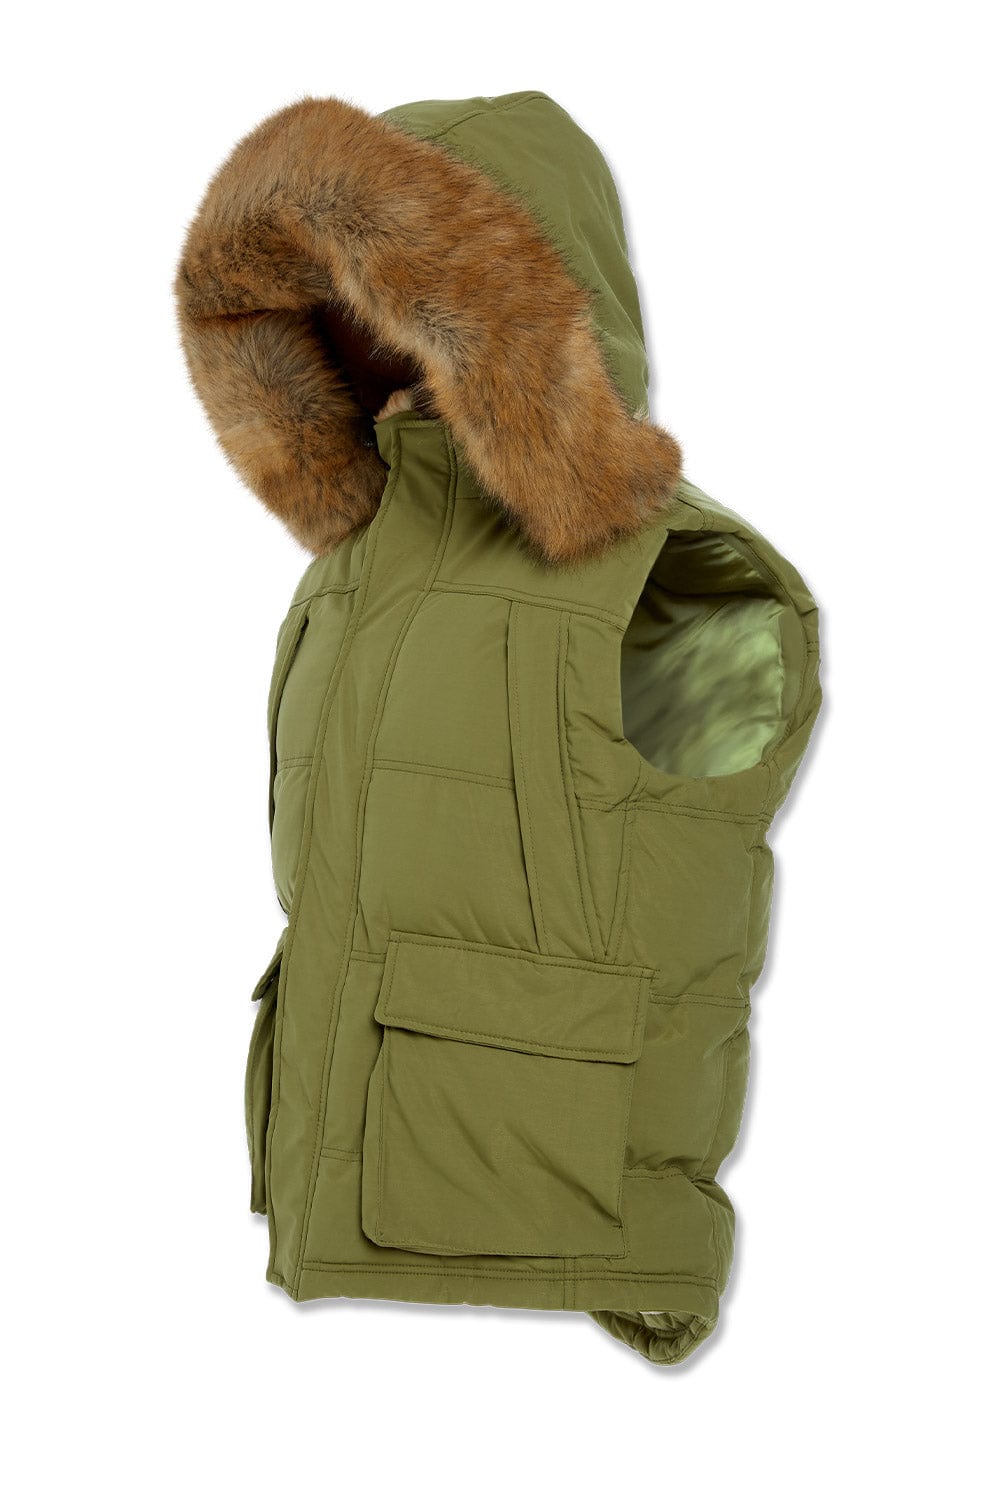 Military Green Multi Colored Fox Fur Lined Parka Hood